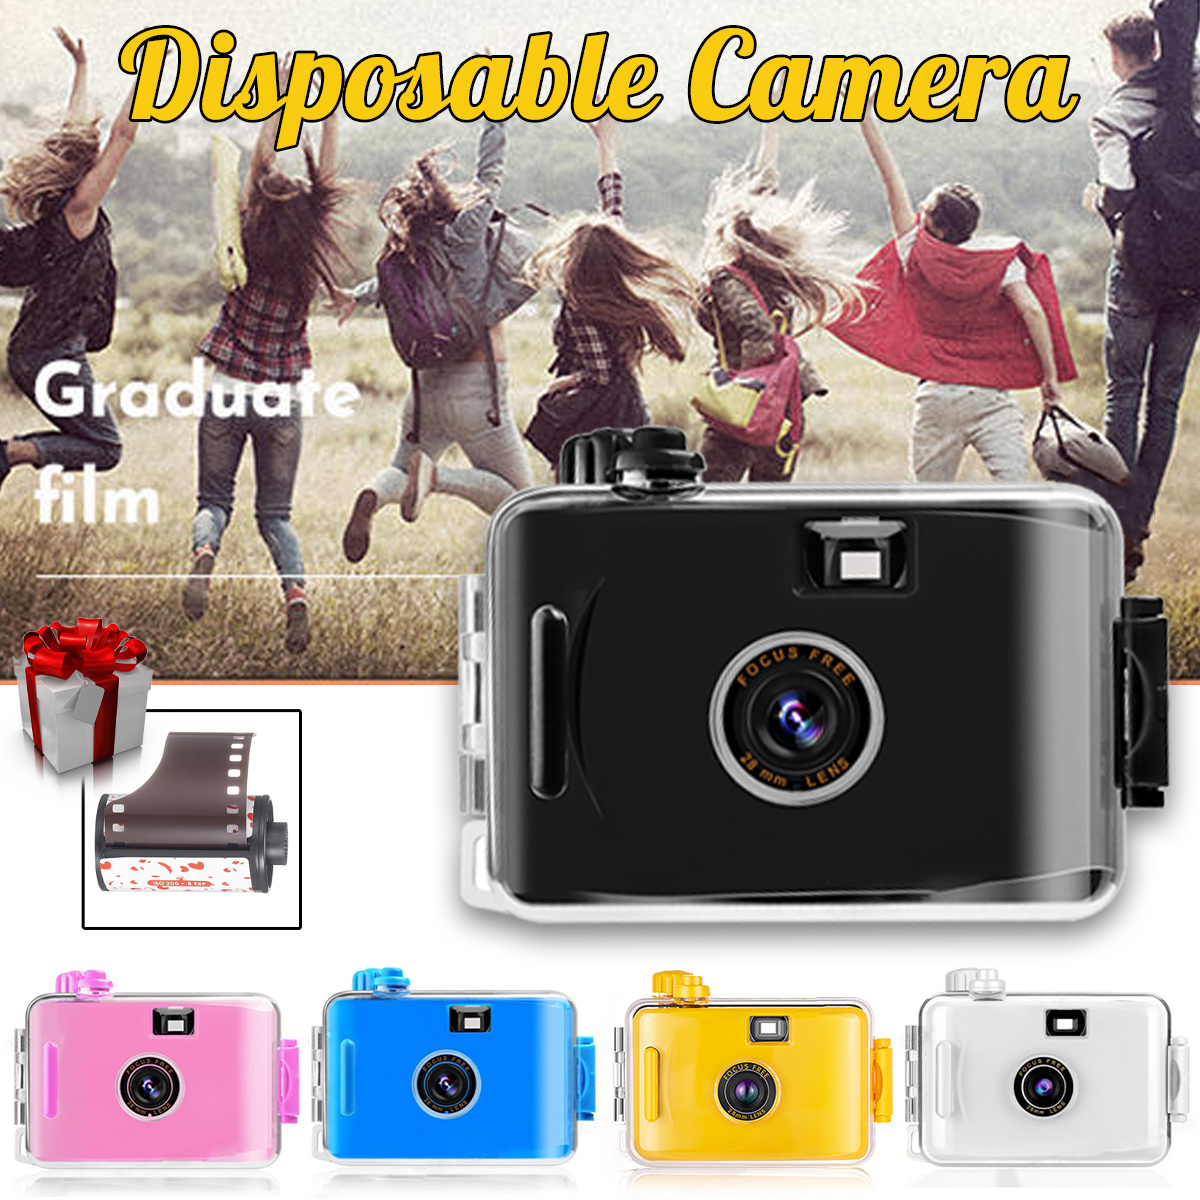 Waterproof-Disposable-Camera-Portable-Film-Camera-With-DIY-Case-for-Graduation-Trip-Christmas-1952625-1